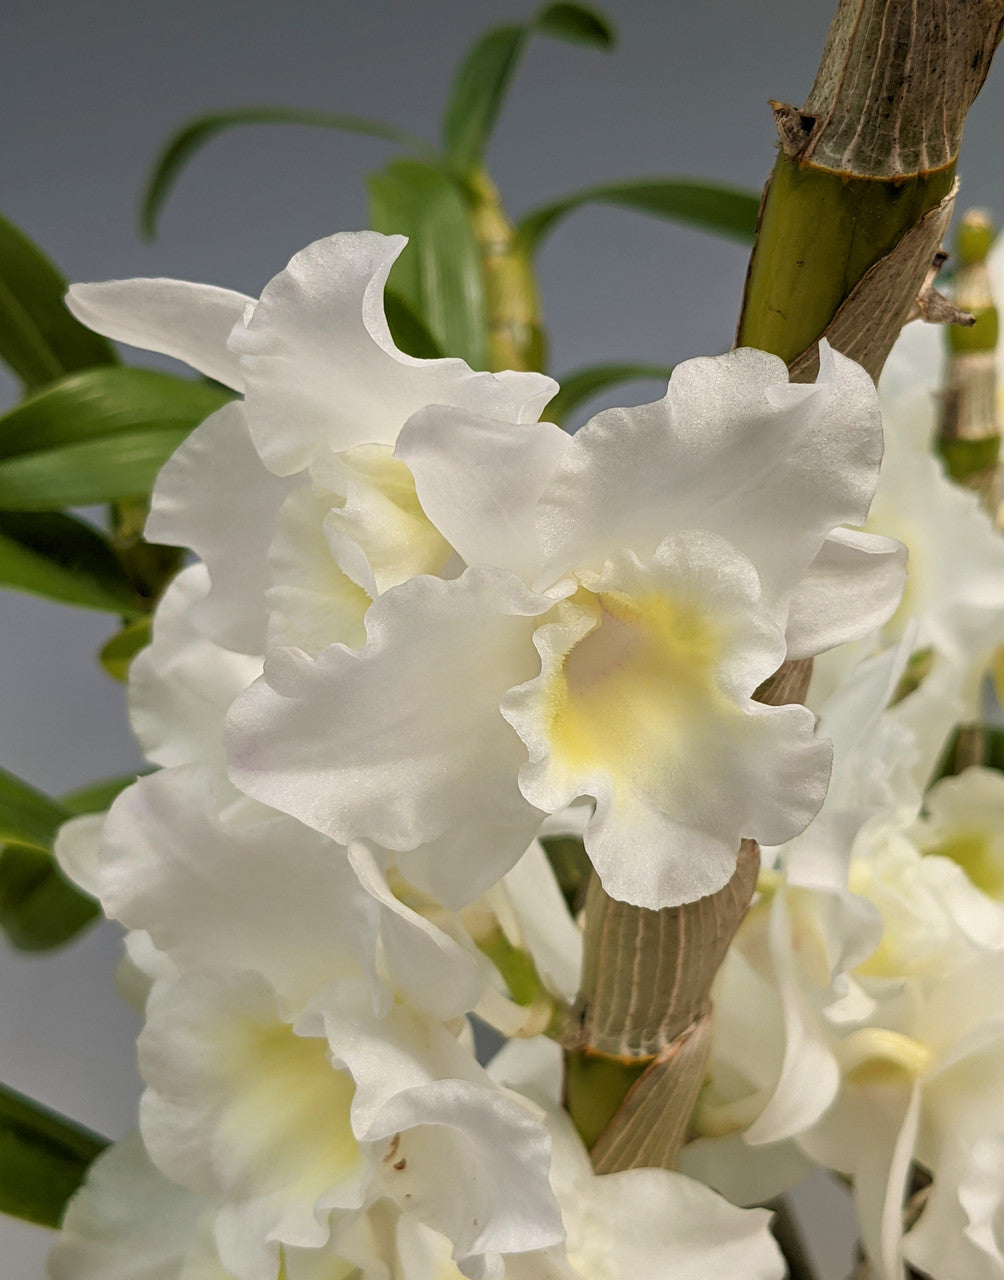 Dendrobium Sea Mary 'Snow King' Orchid Flower - Exquisite White Blooms for Your Home - Shop Now